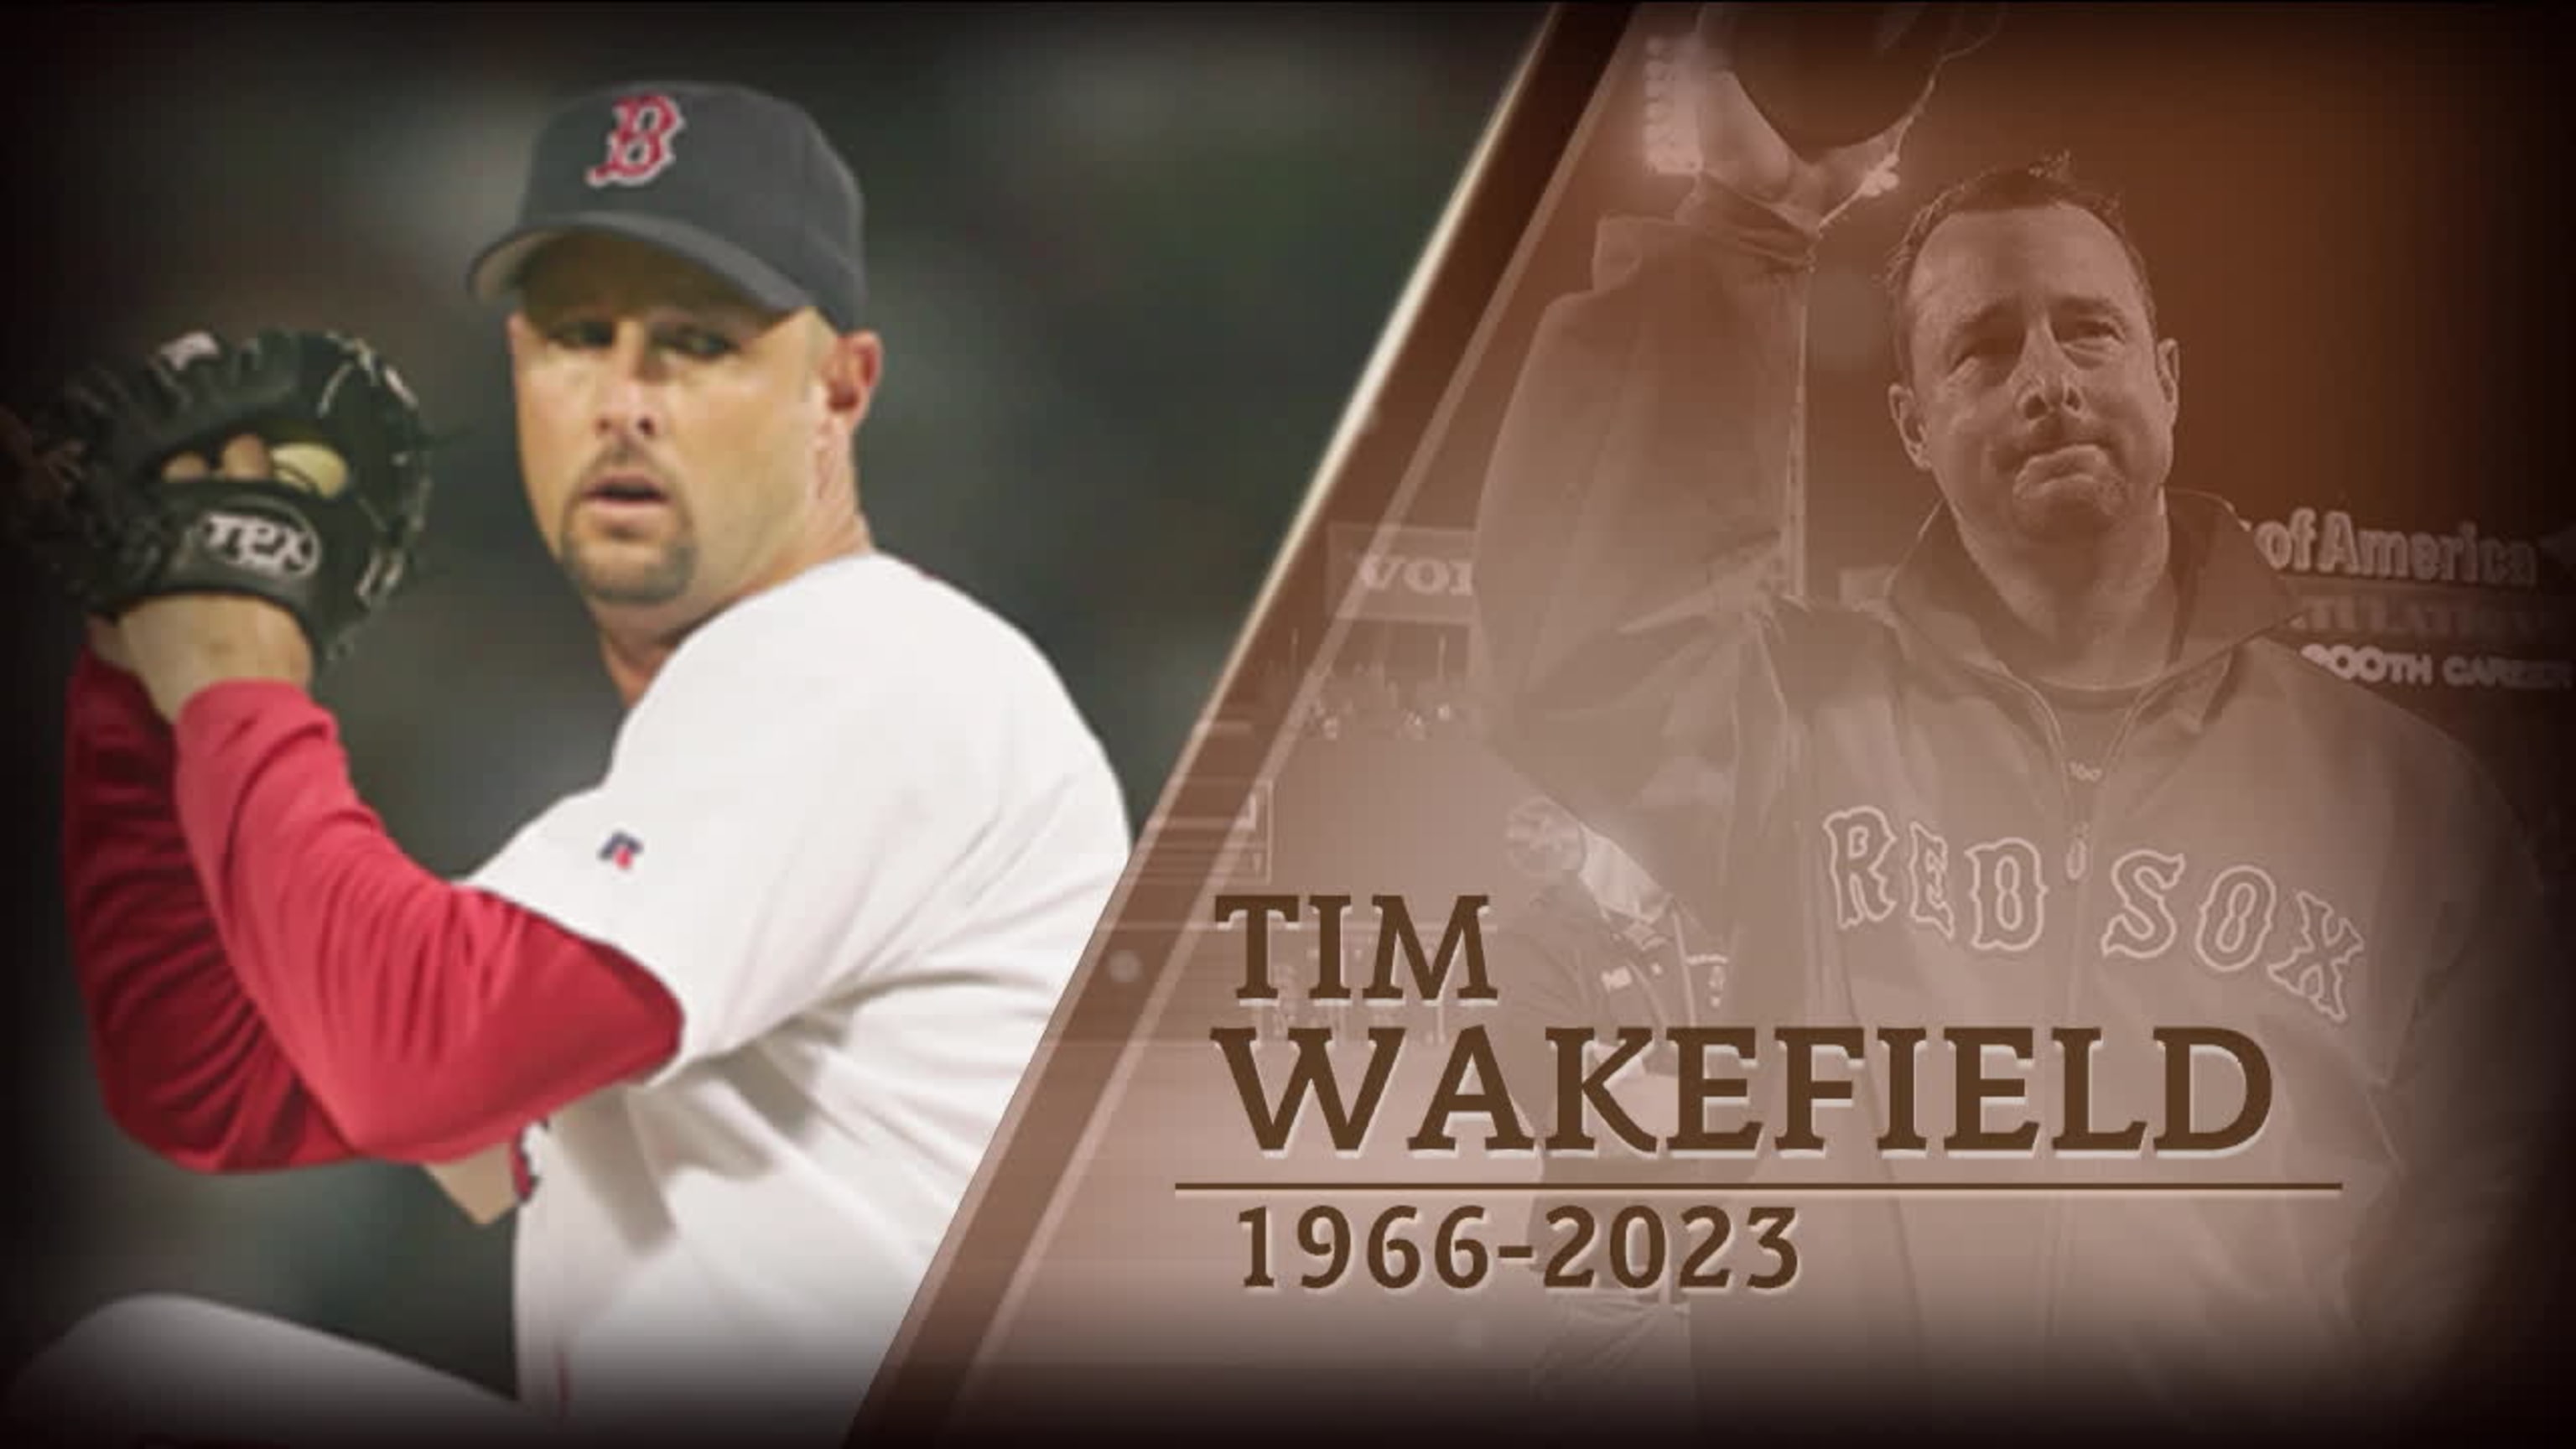 MLB on X: We are deeply saddened by the passing of Tim Wakefield